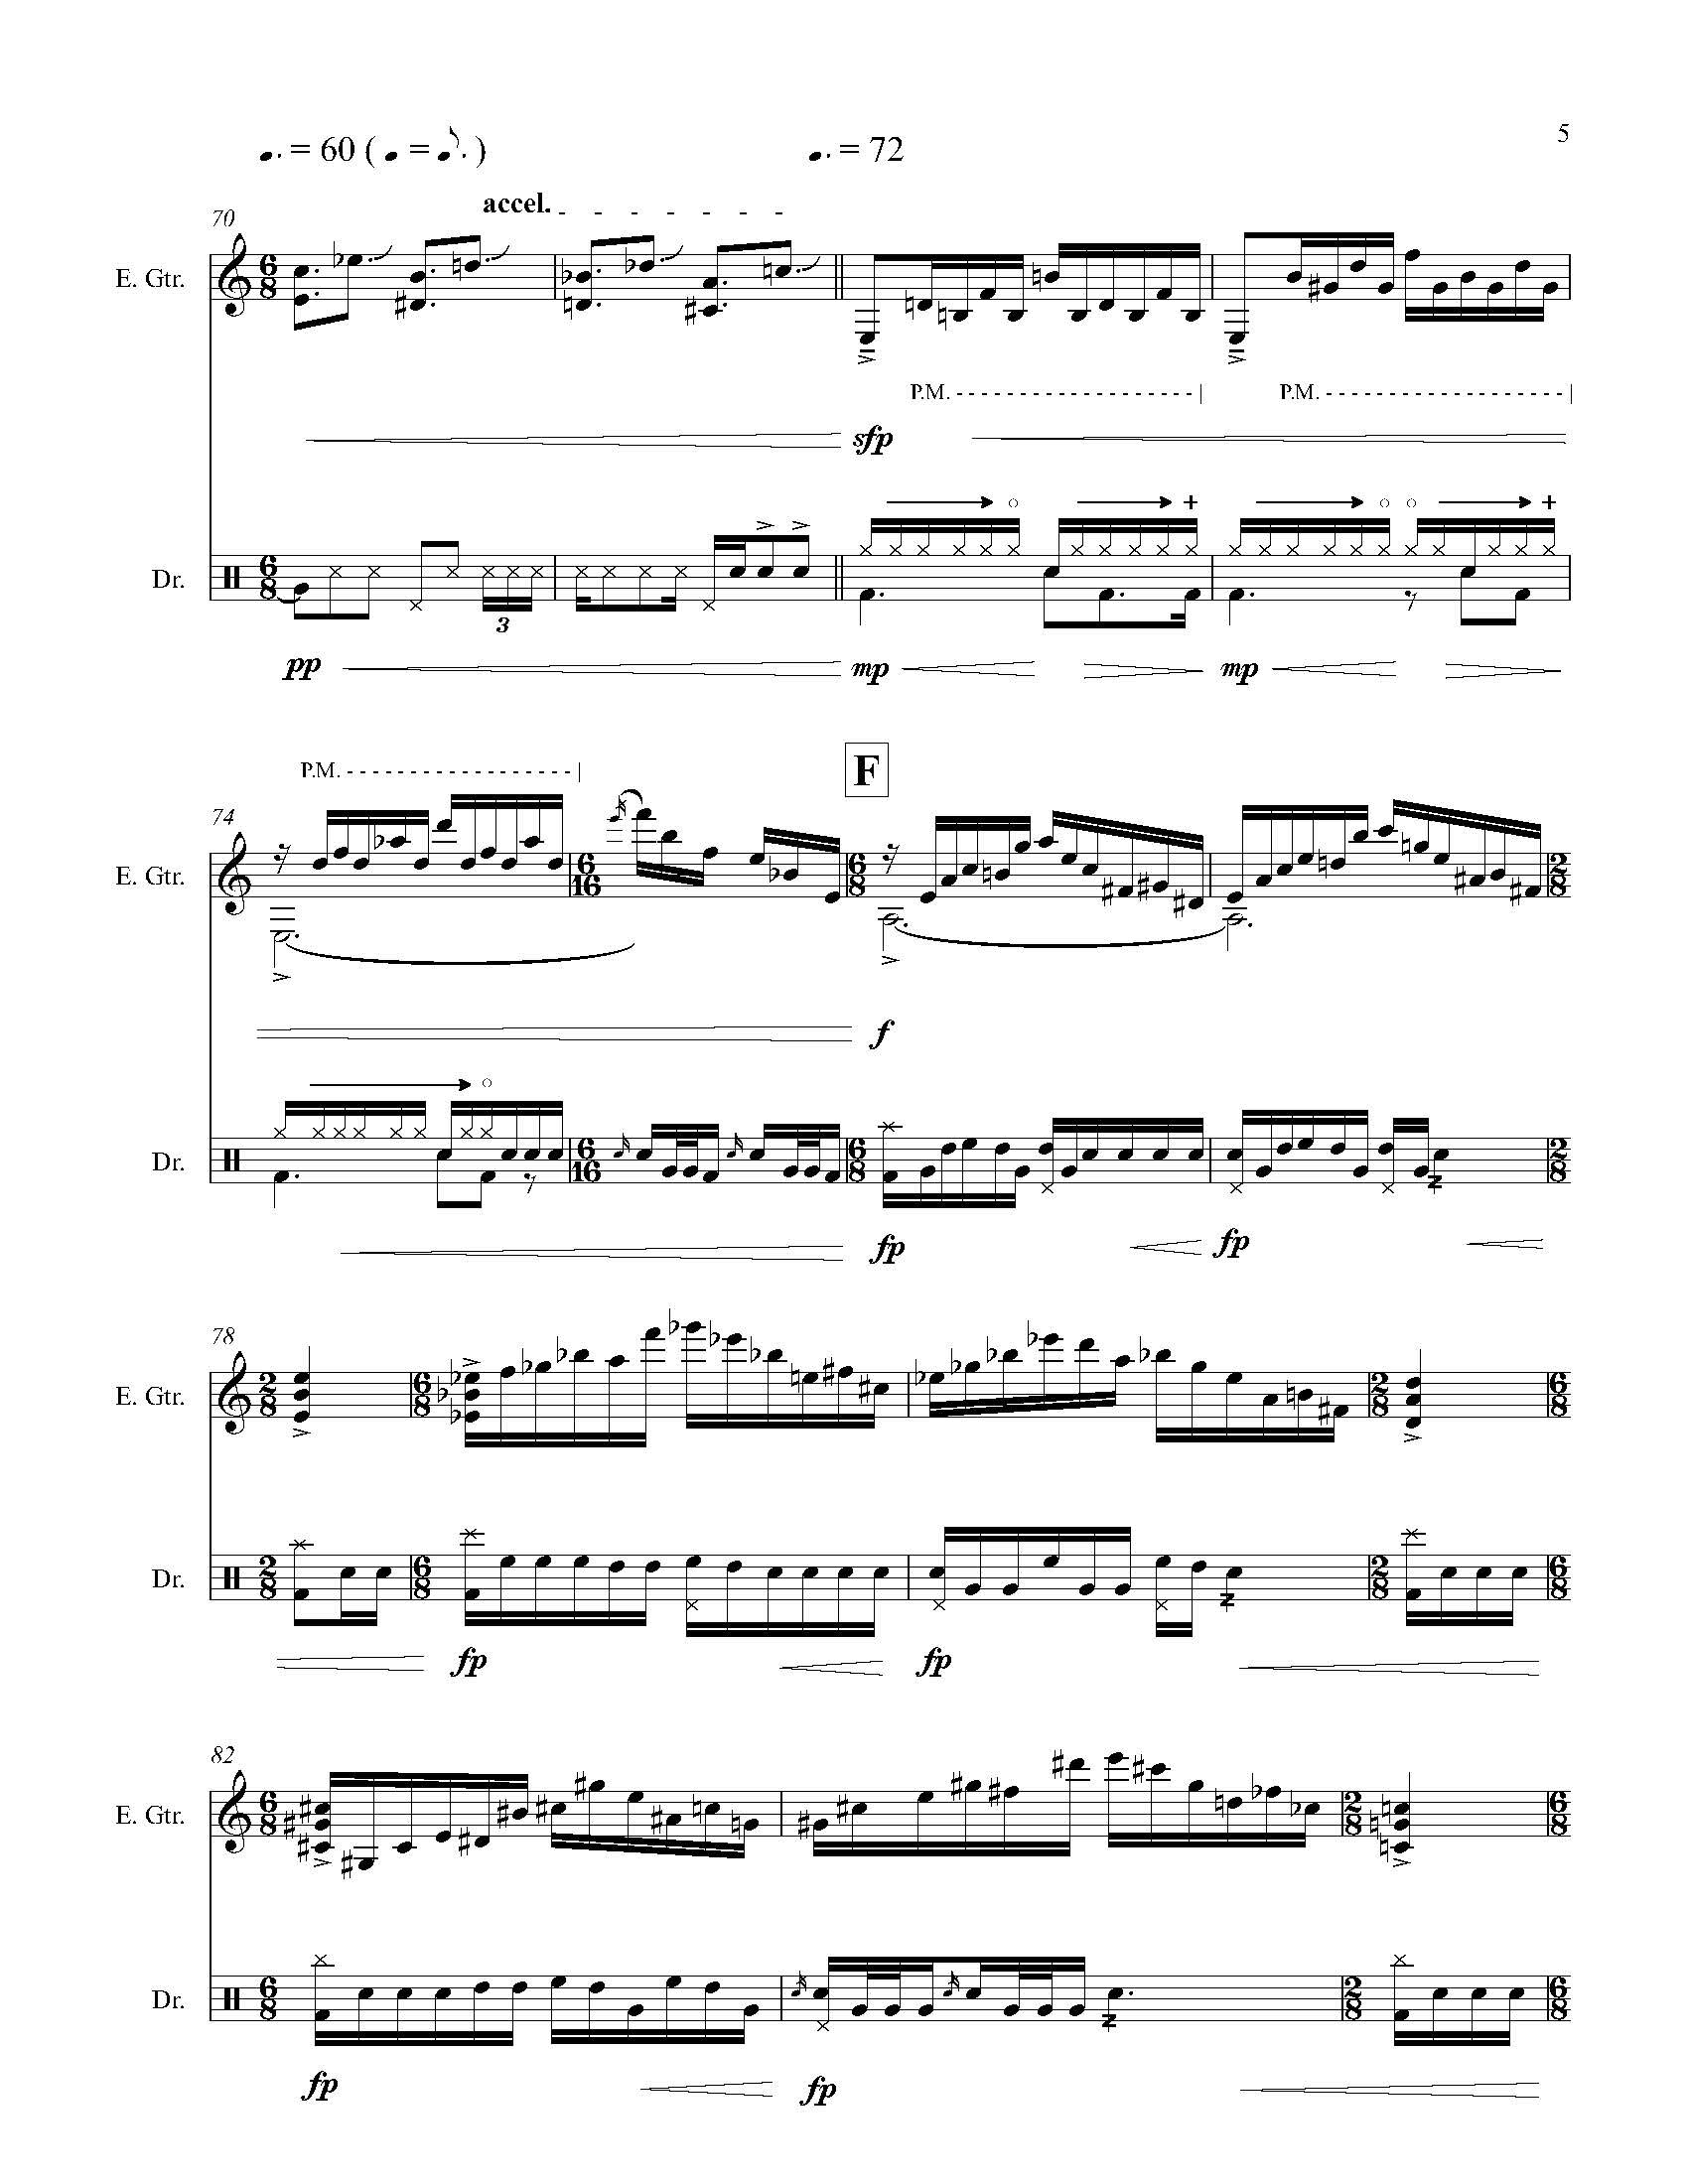 Atoms - Complete Score_Page_11.jpg